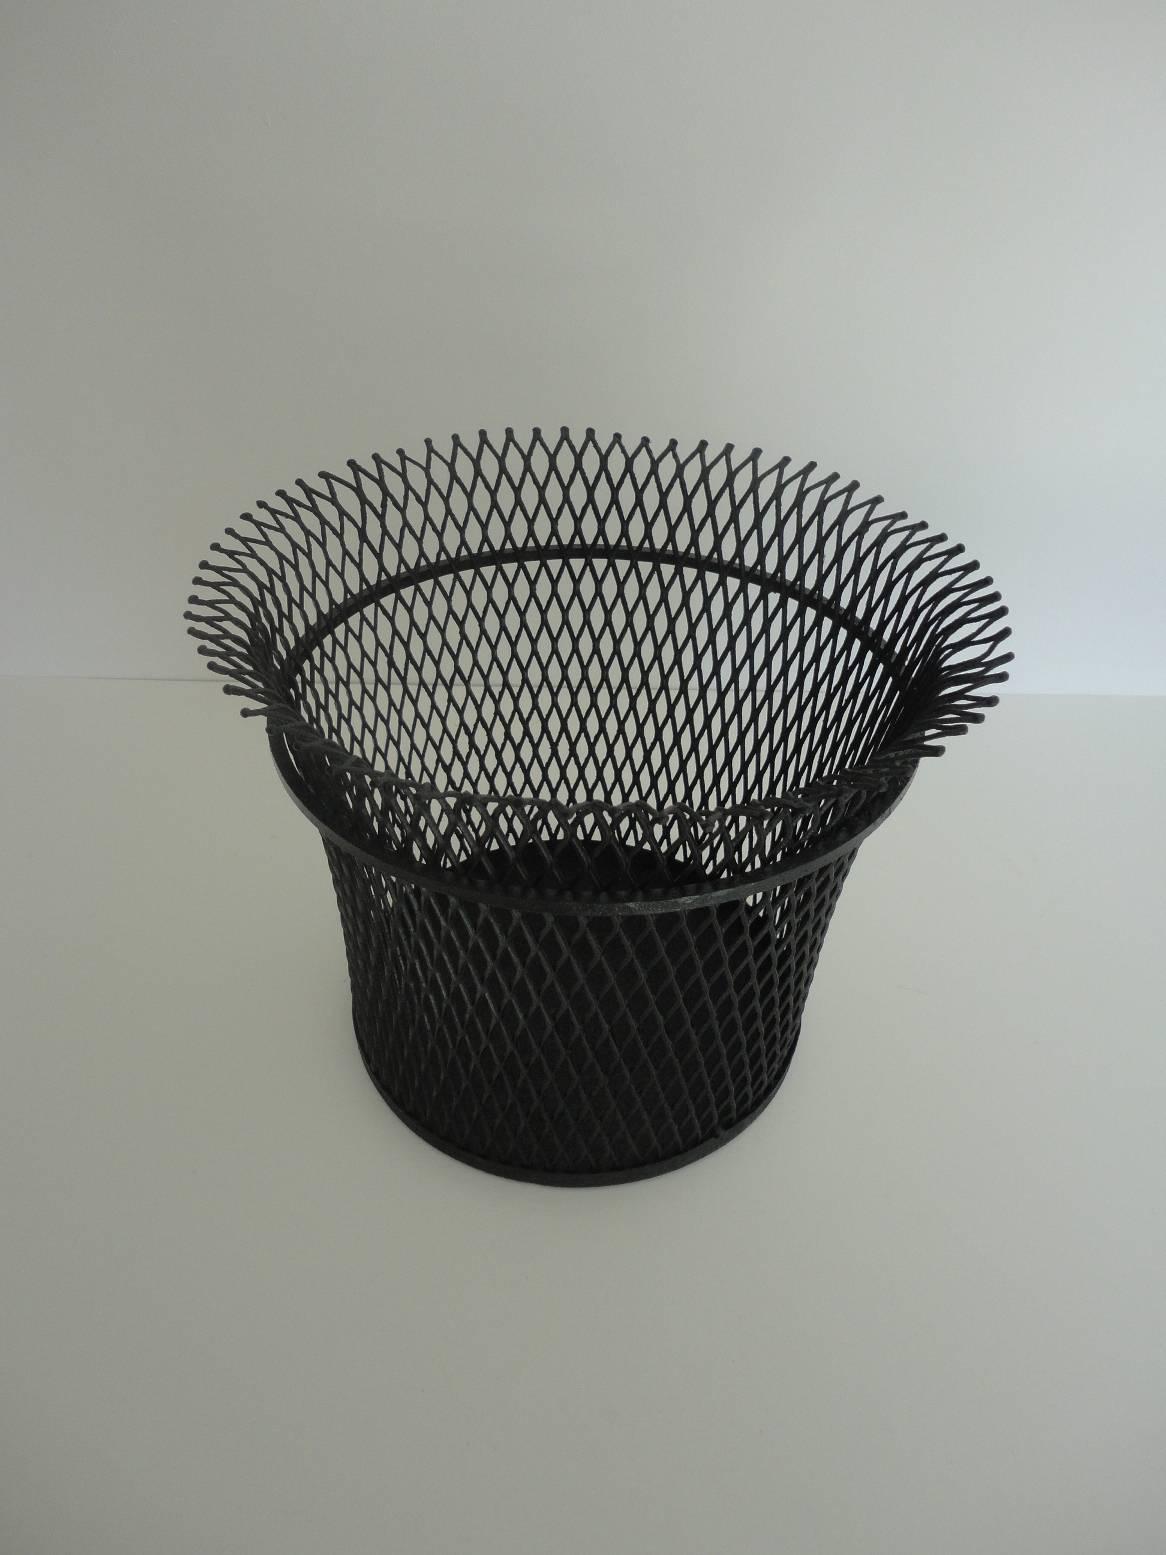 Wastepaper basket designed in 1951 by Mathieu Mategot. Black lacquered metal. Documented in the book 